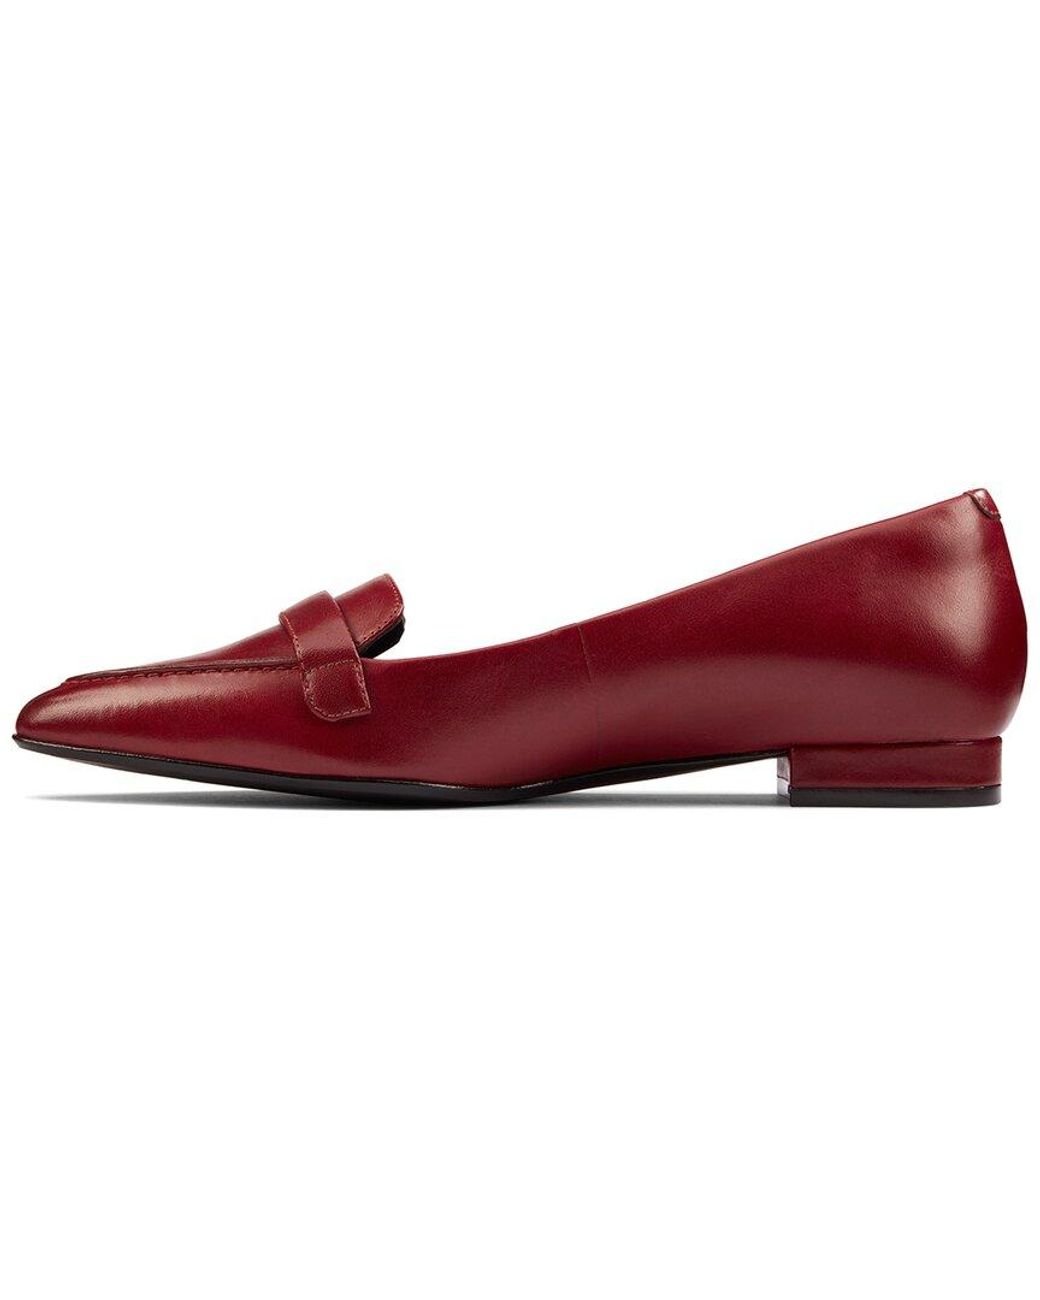 Clarks Laina Leather Shoe in Red | Lyst